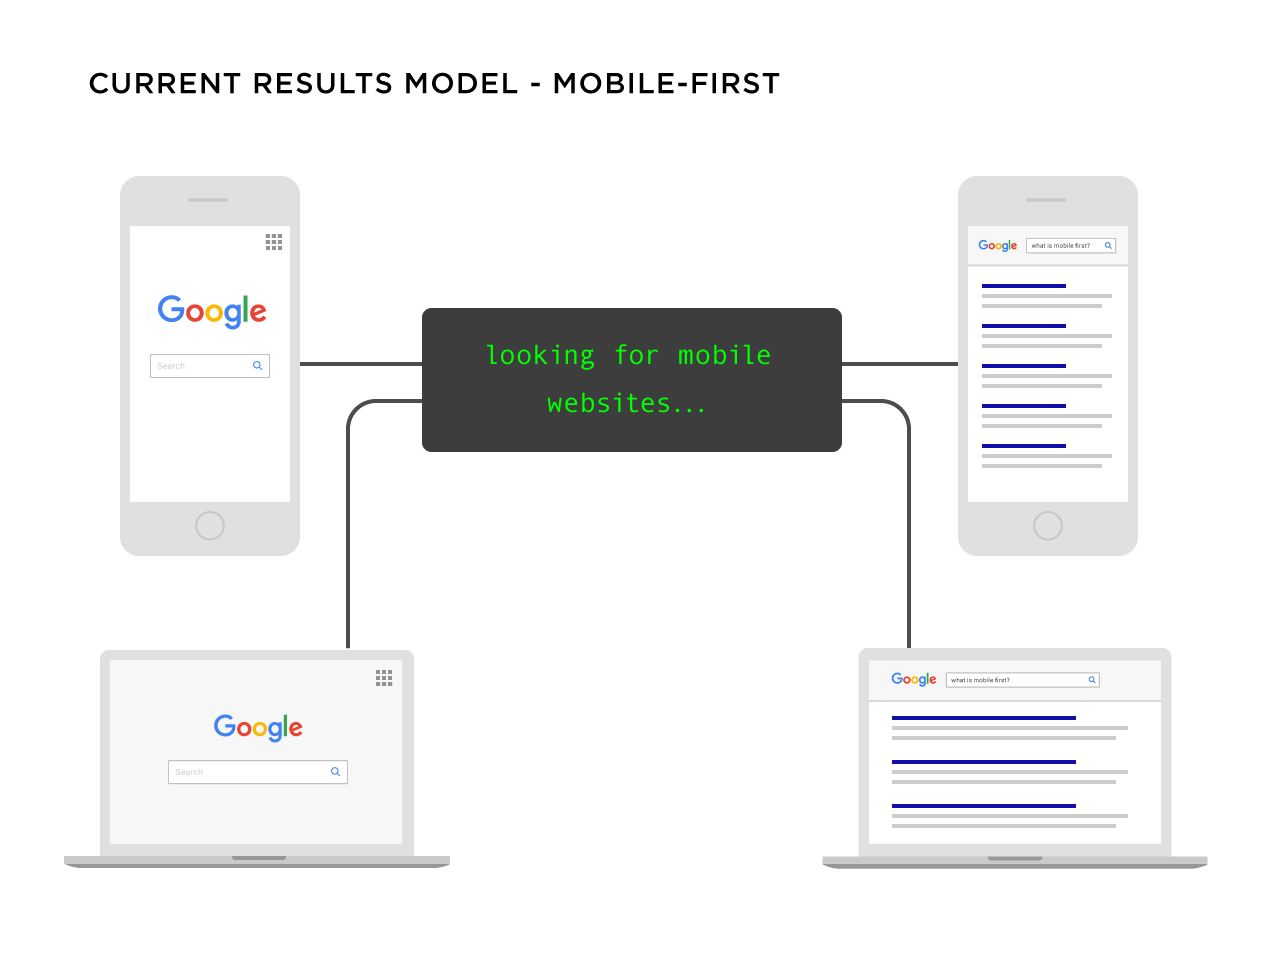 Google – Mobile-first search model